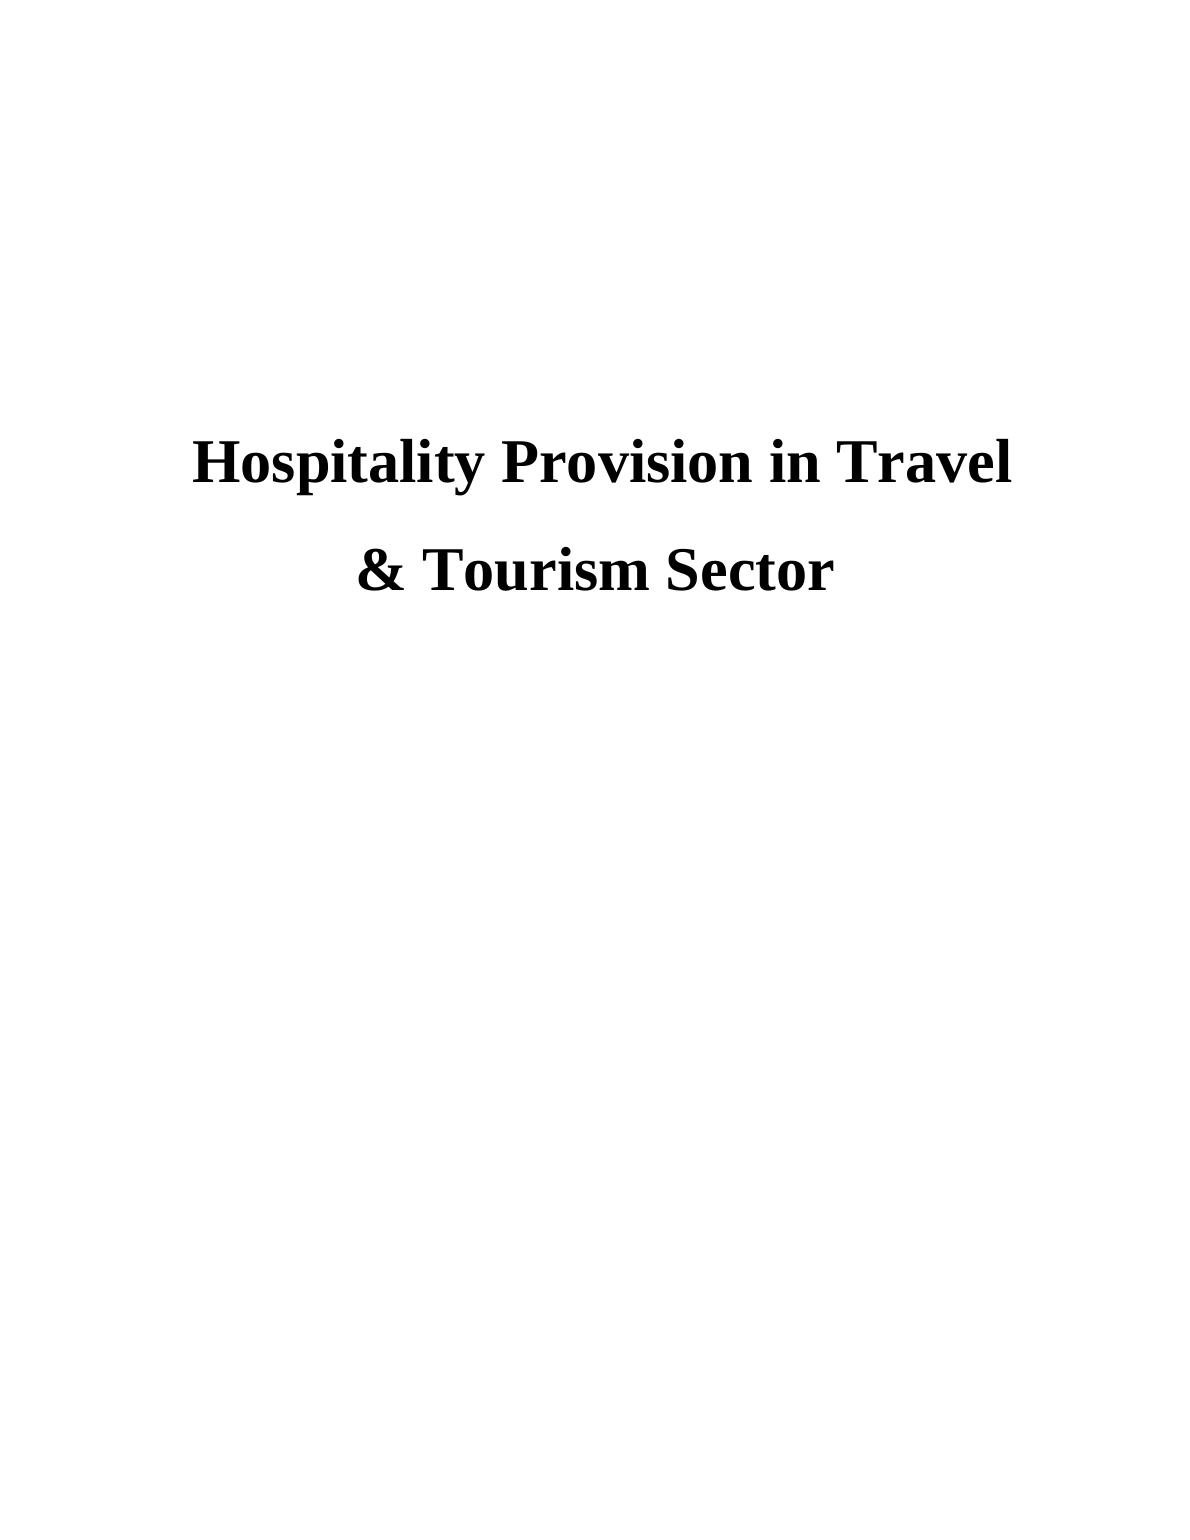 Integration of hospitality provision in travel & tourism sector_1